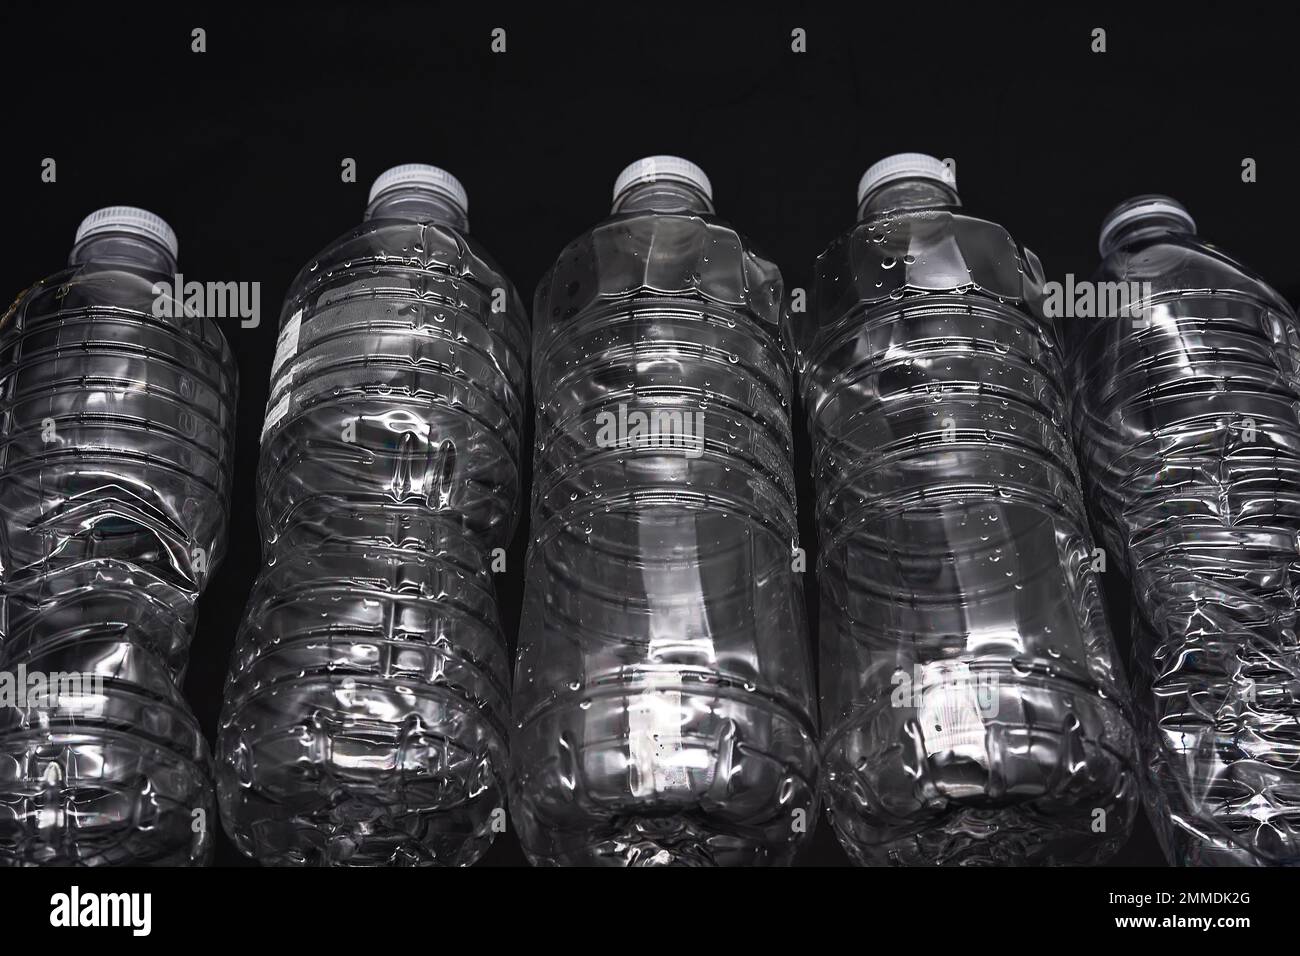 Empty plastic water bottles recycle material reduce waste black background Stock Photo